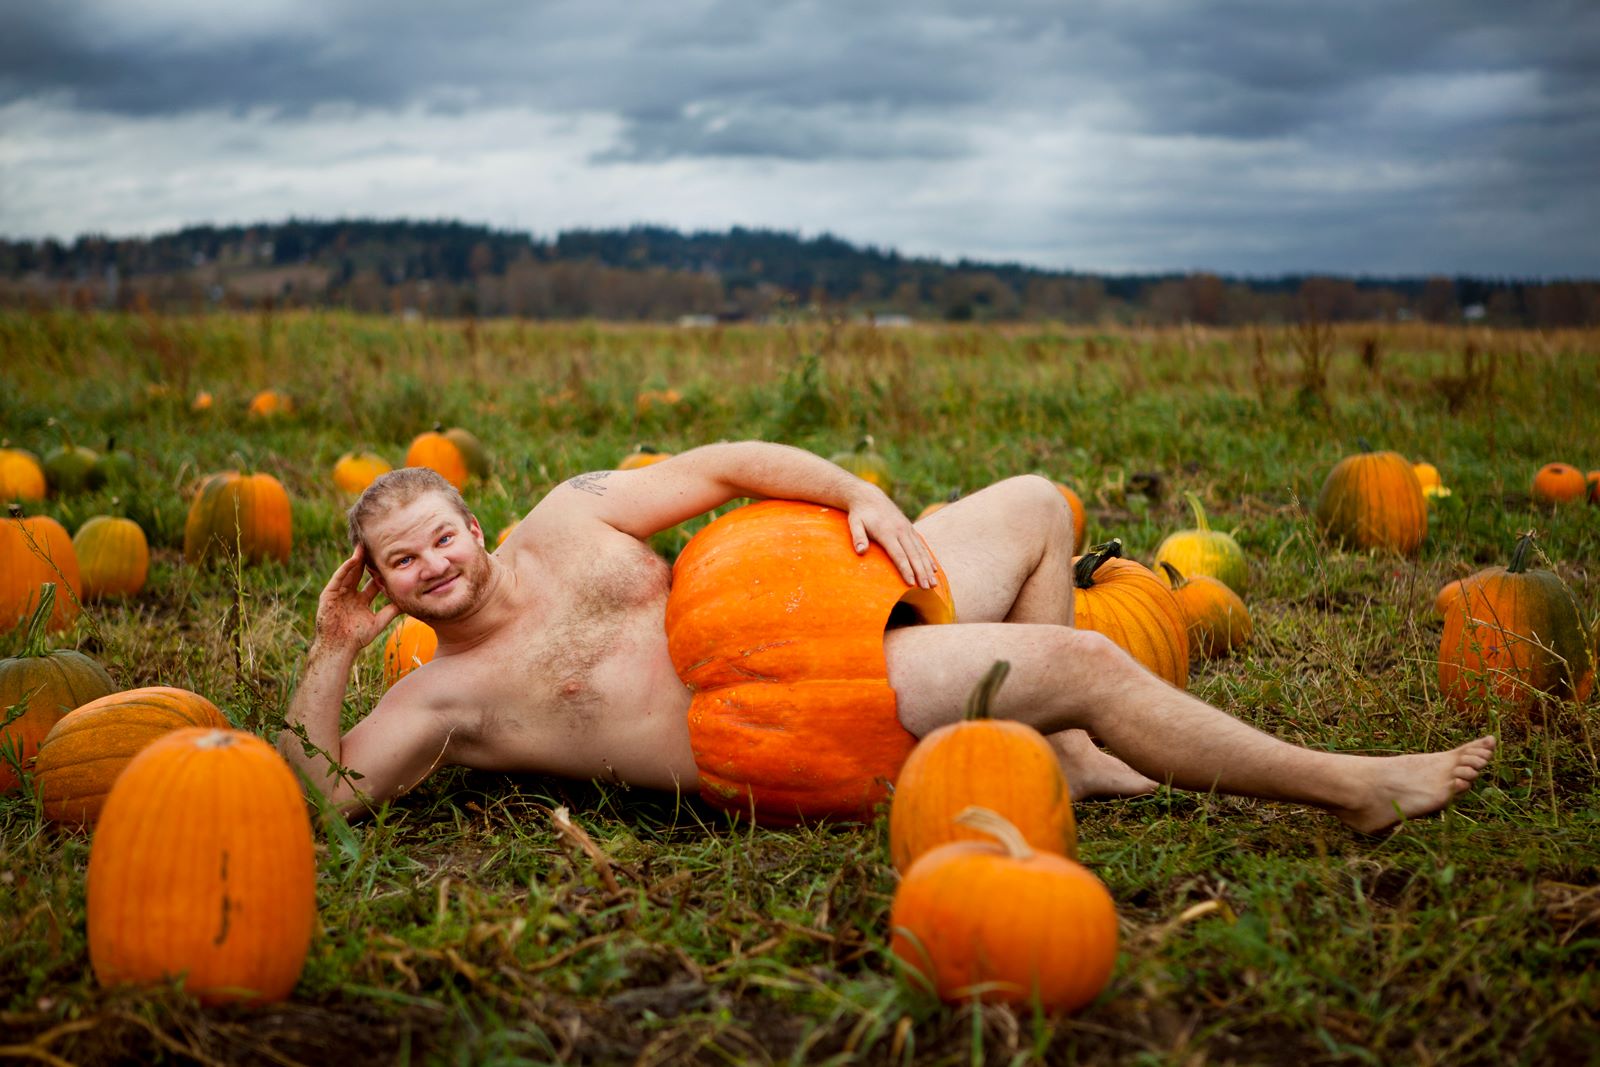 Funny Halloween costumes ideas for your event photography